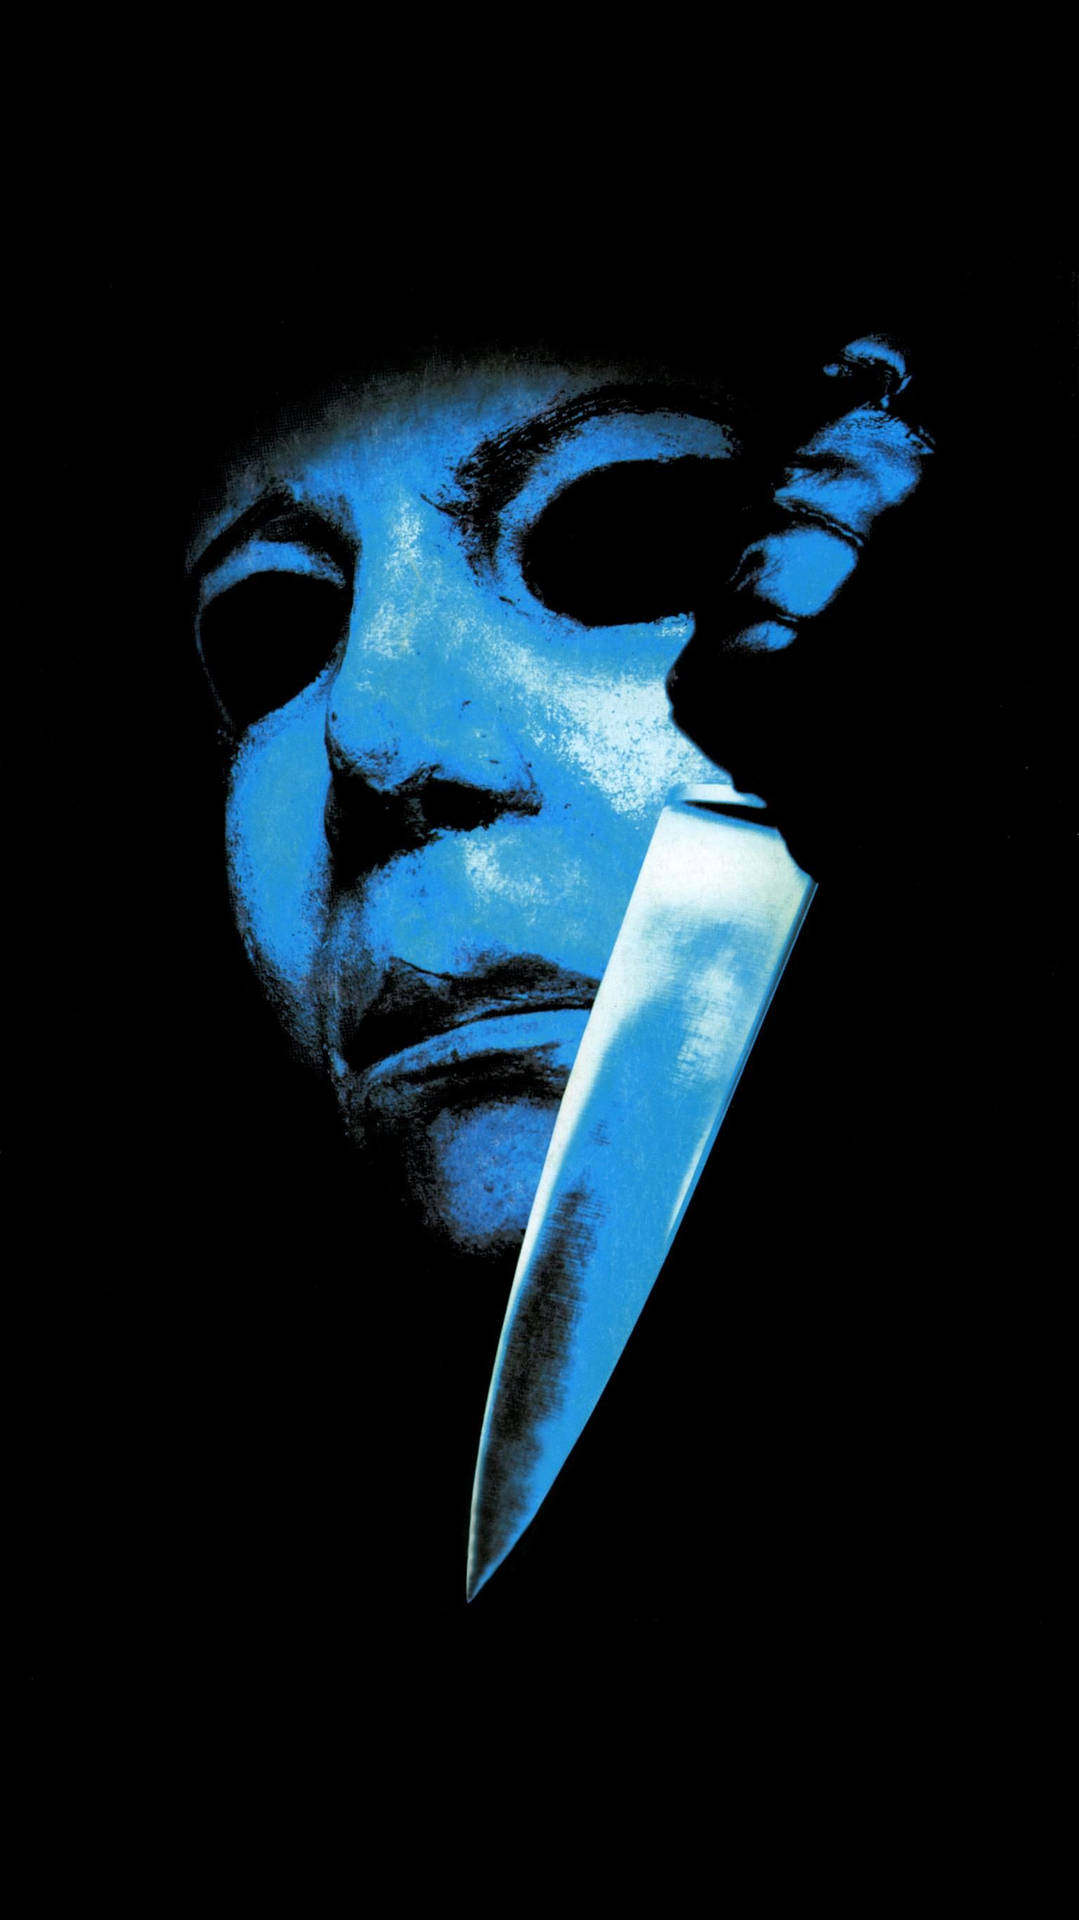 Icepick Grip Knife Michael Myers Iphone - Isborrsgripkniv Michael Myers Iphone Wallpaper